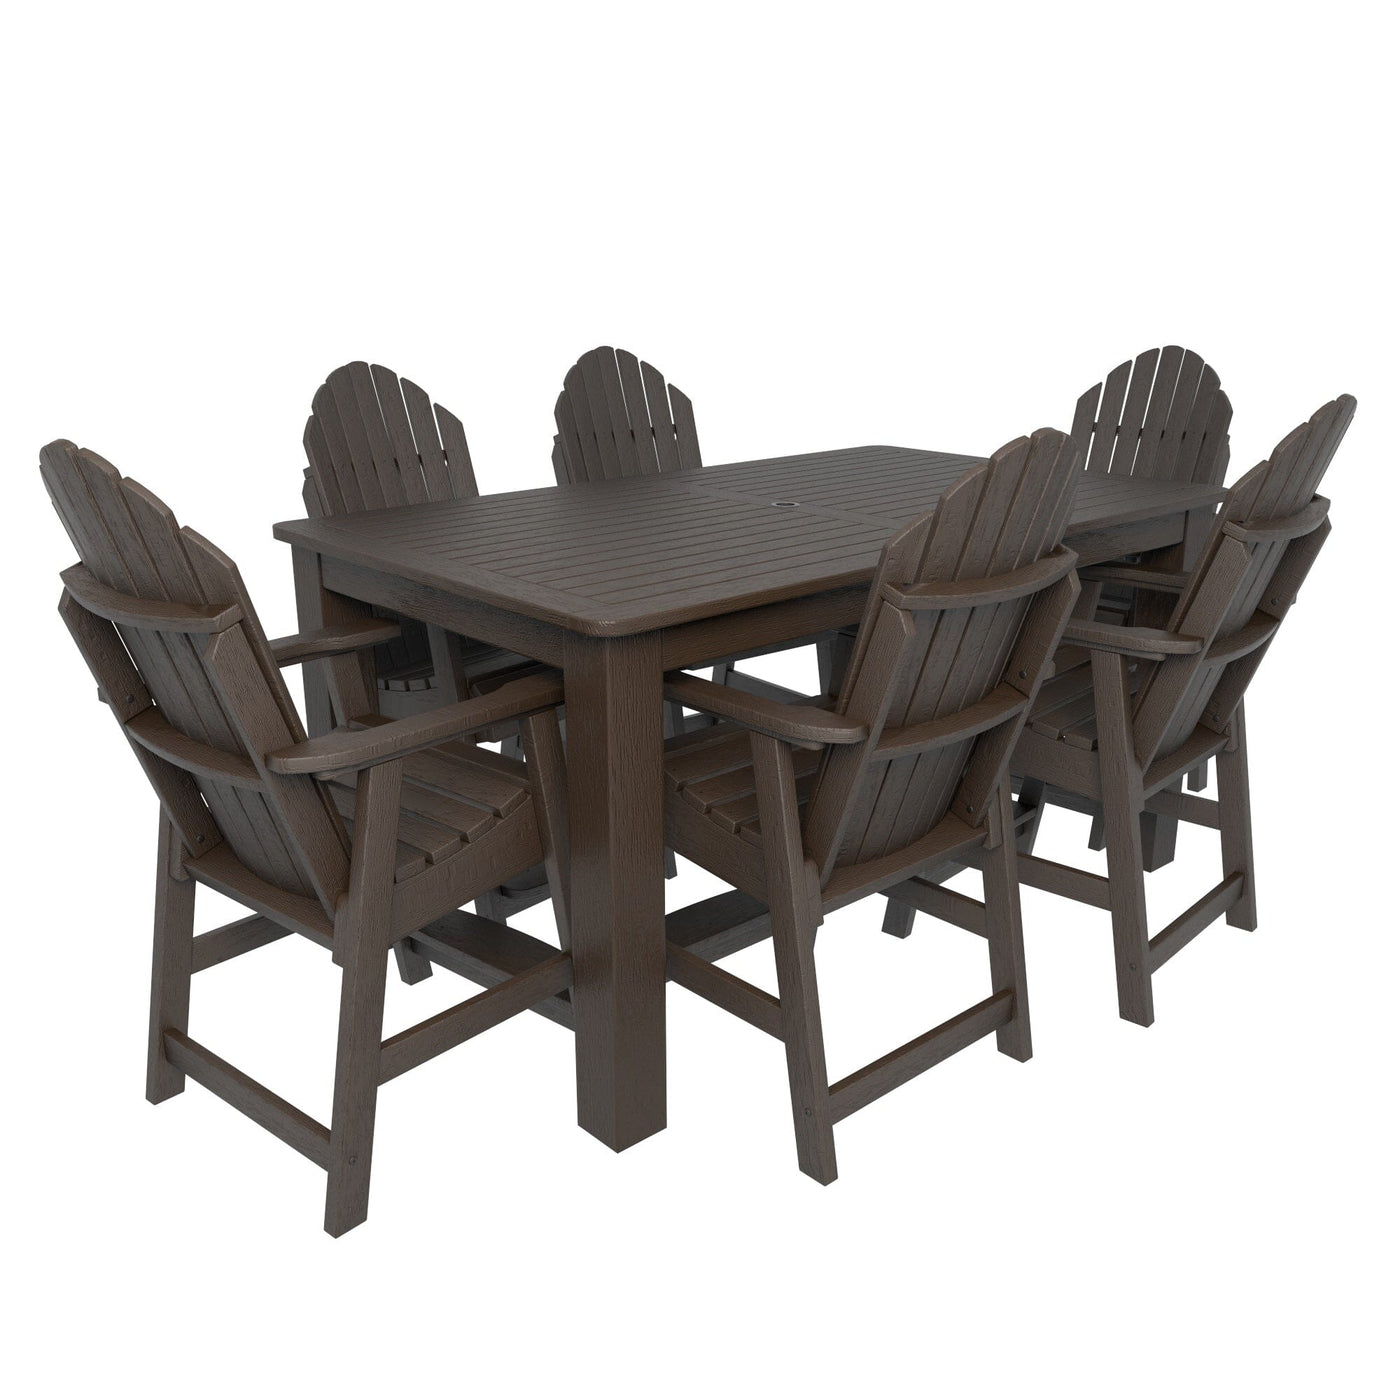 Hamilton 7pc Rectangular Outdoor Dining Set 42in x 72in - Counter Height Dining Highwood USA Weathered Acorn 